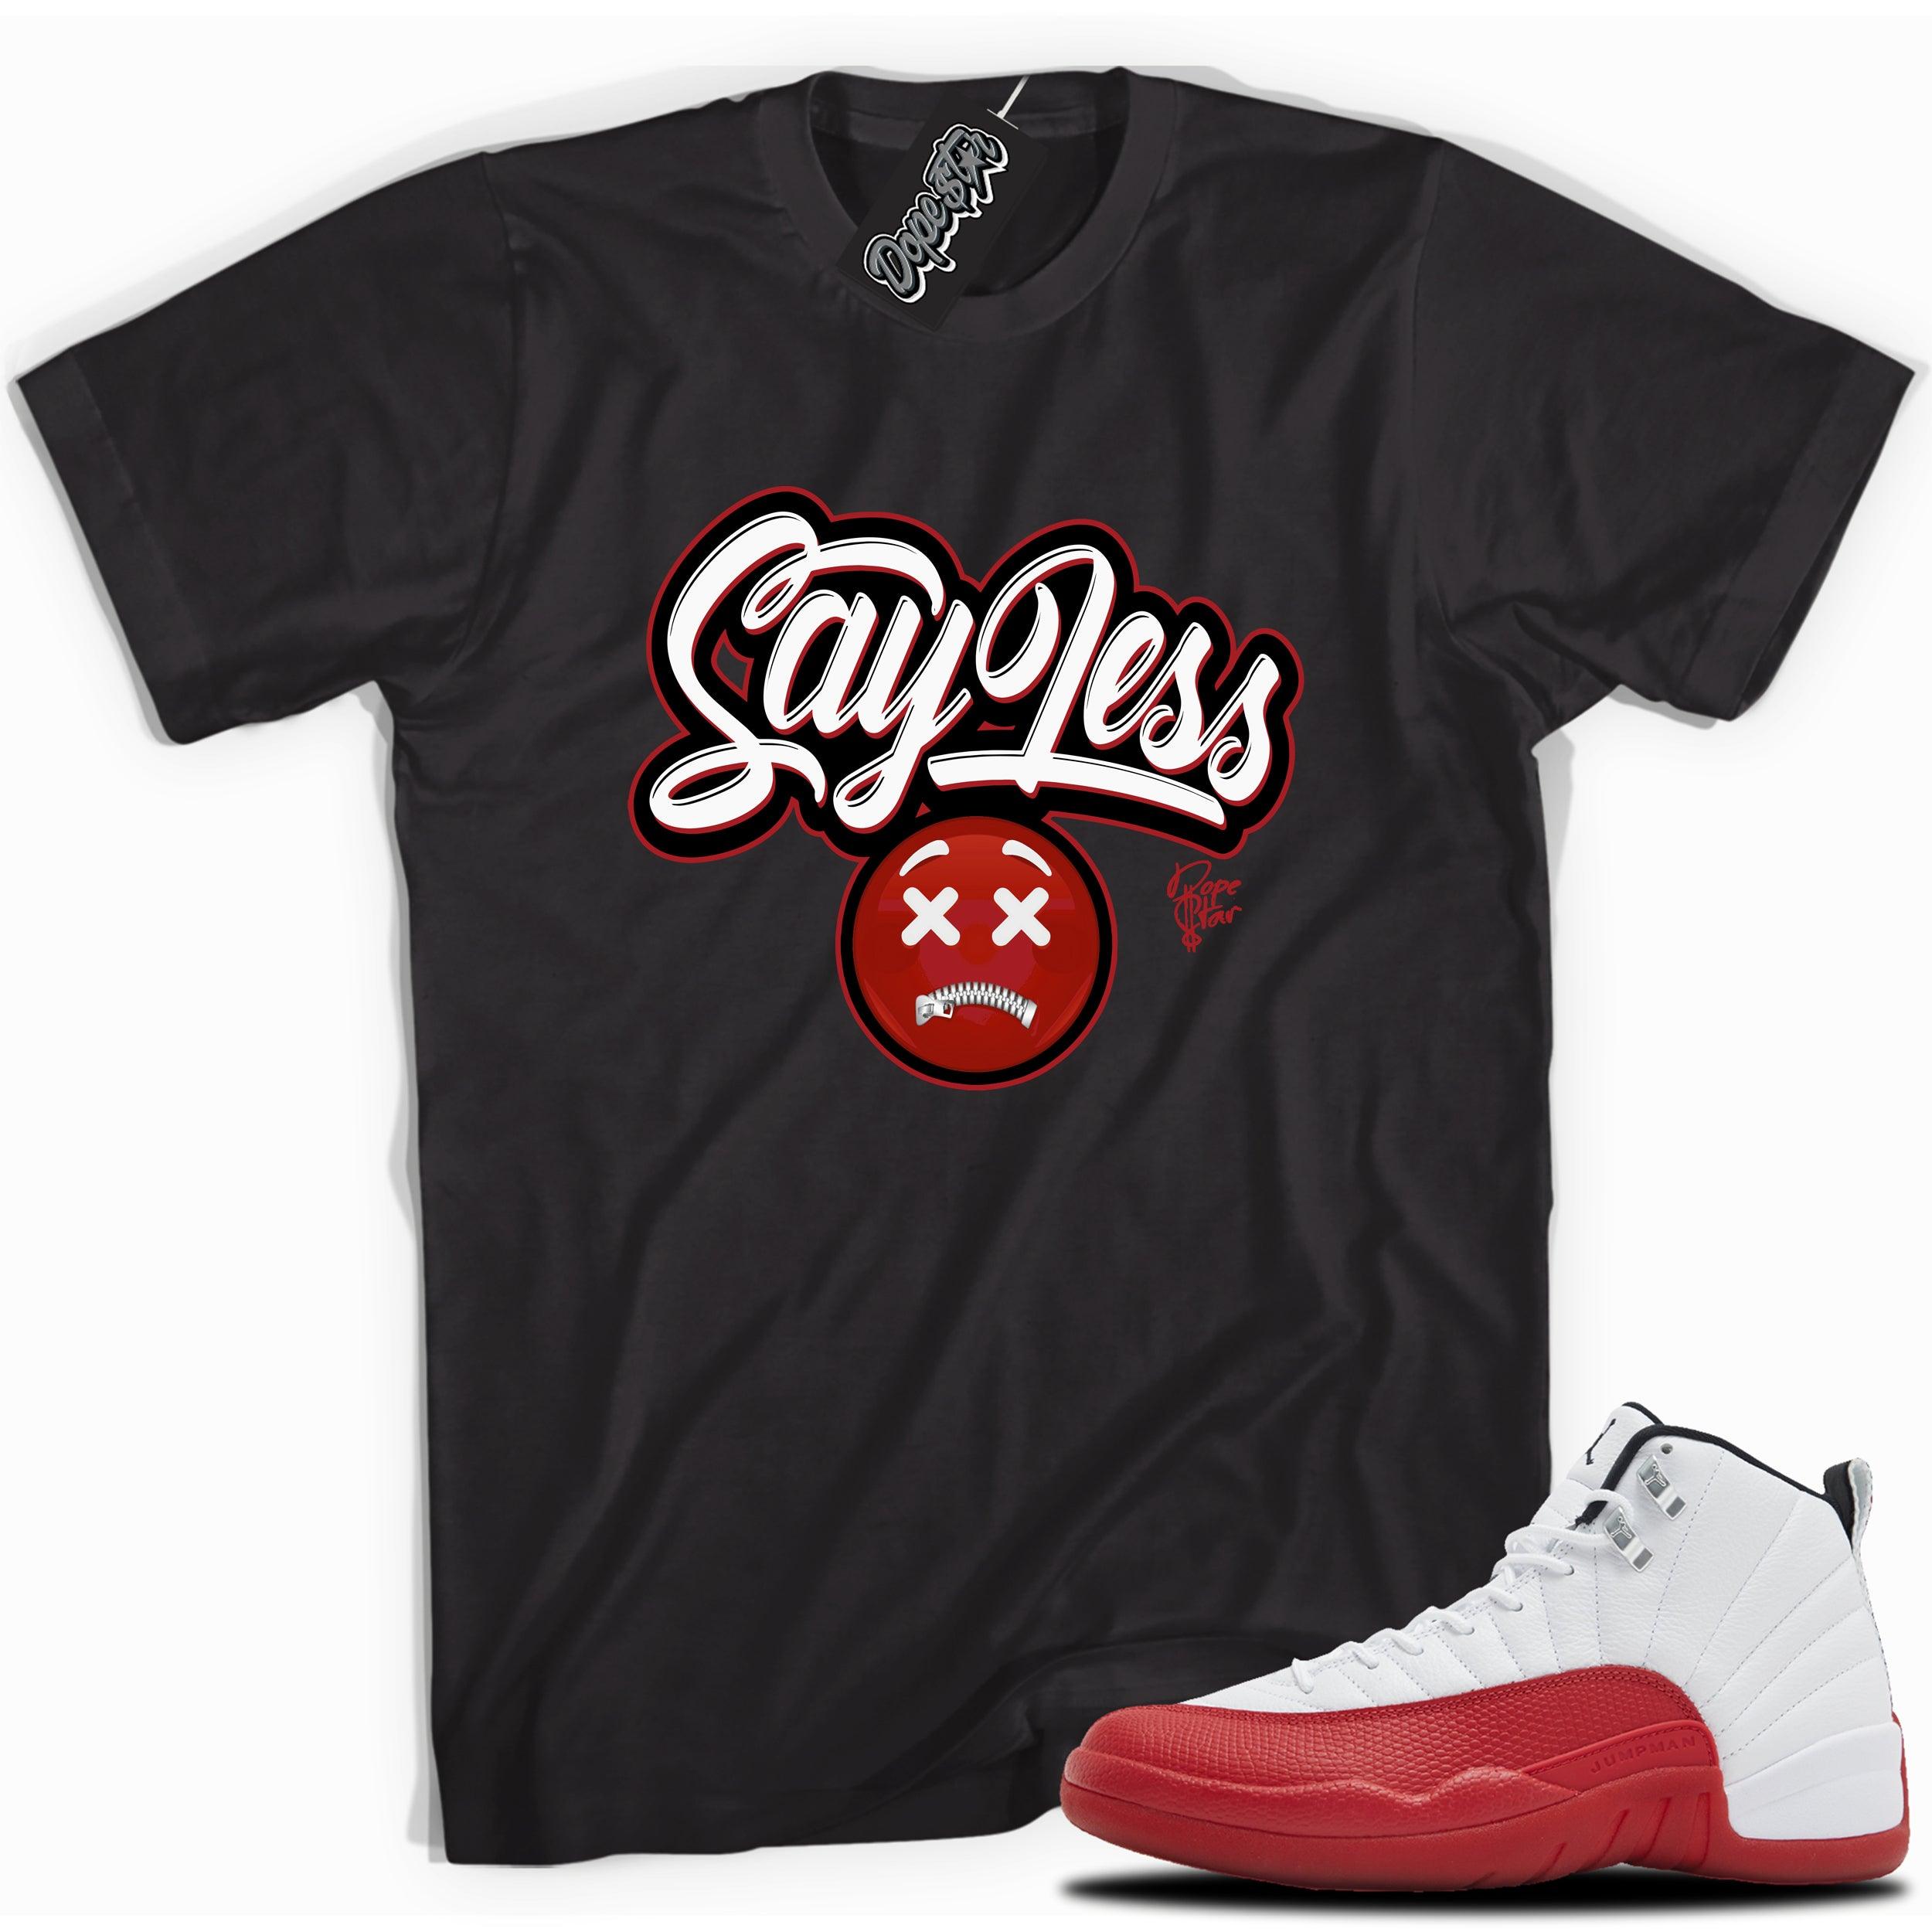 Cool Black graphic tee with “SAY LESS” print, that perfectly matches Air Jordan 12 Retro Cherry Red 2023 red and white sneakers